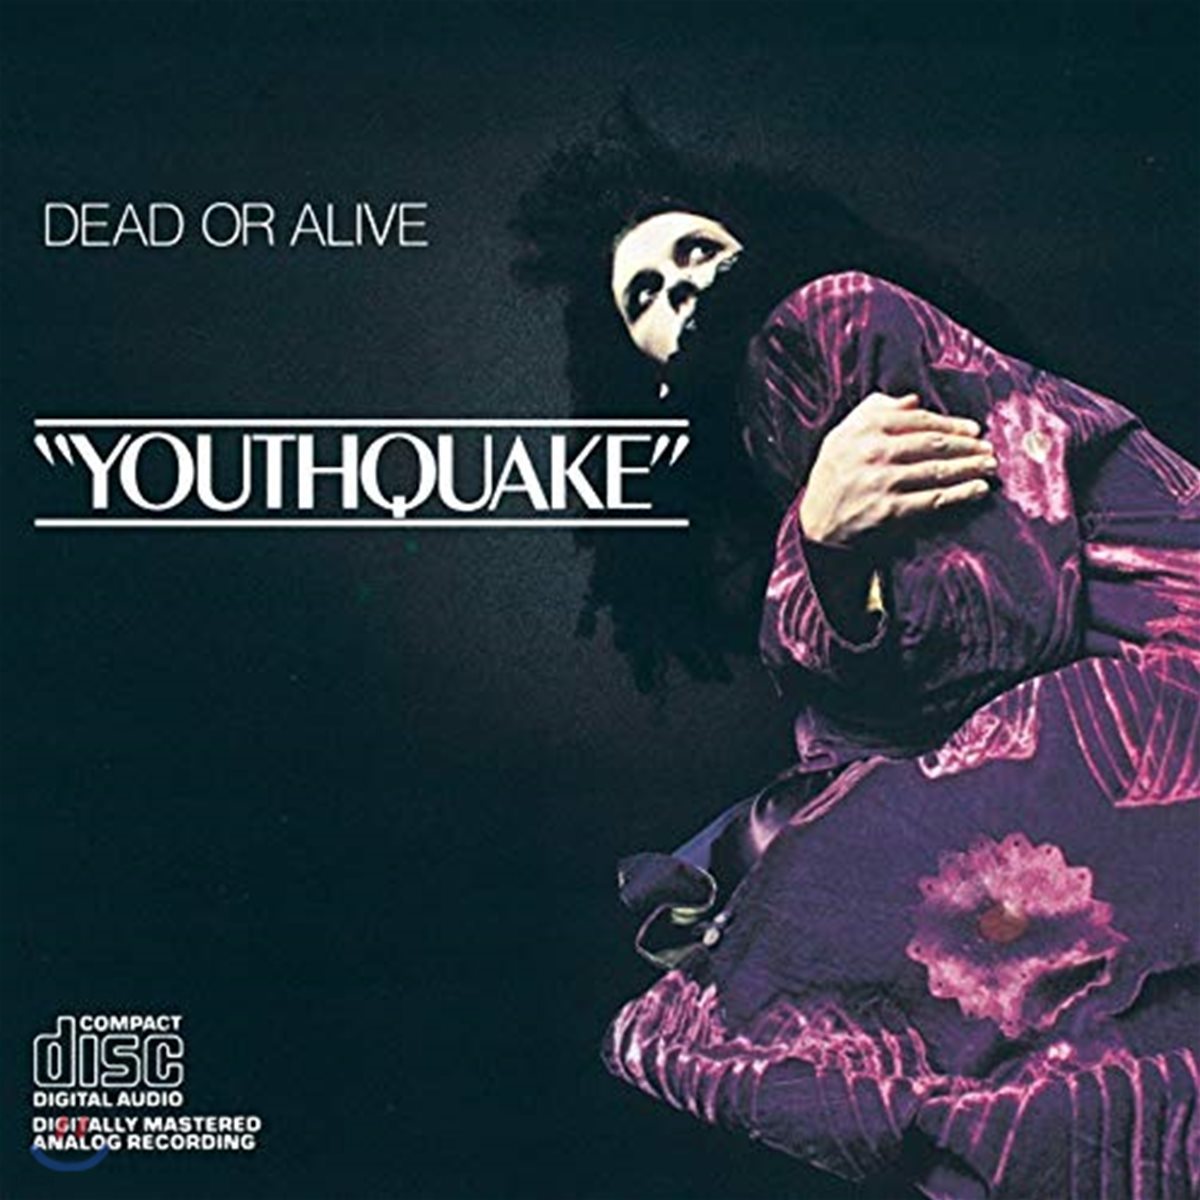 Dead Or Alive (데드 오어 얼라이브) - Youthquake [LP]